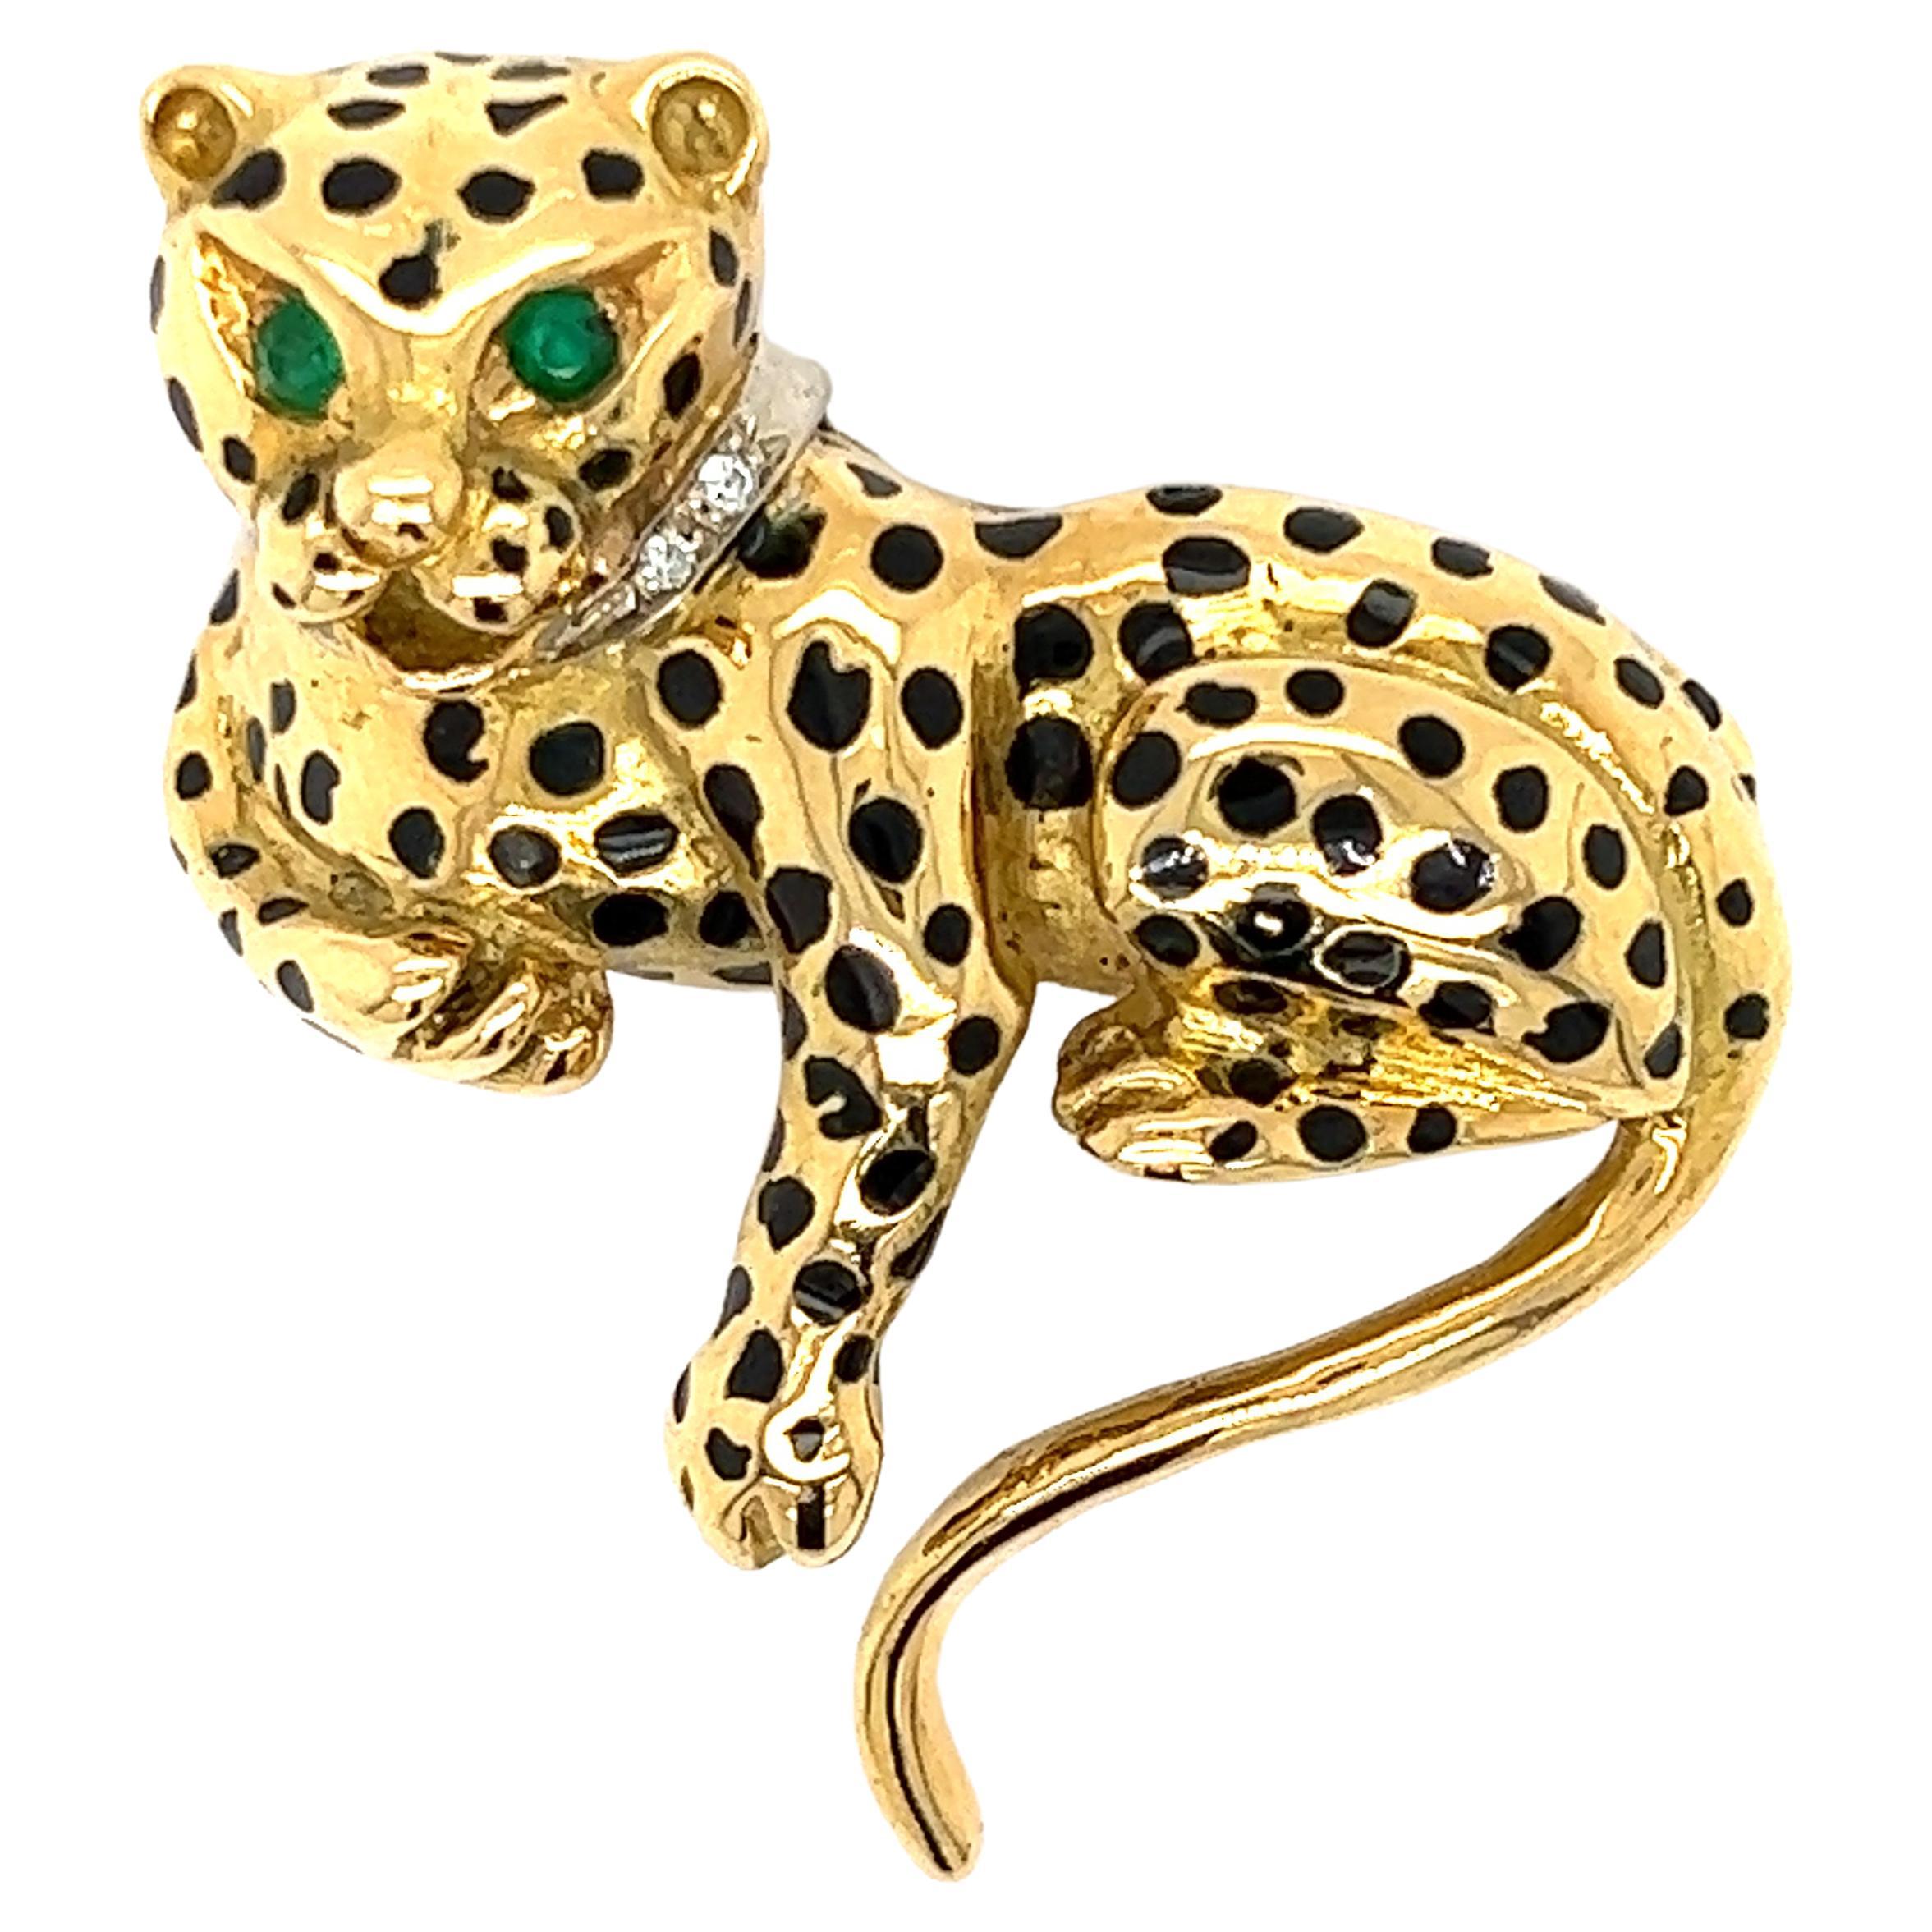 Vintage Emerald and Black Enamel Cougar Brooch in 18Kt Yellow Gold